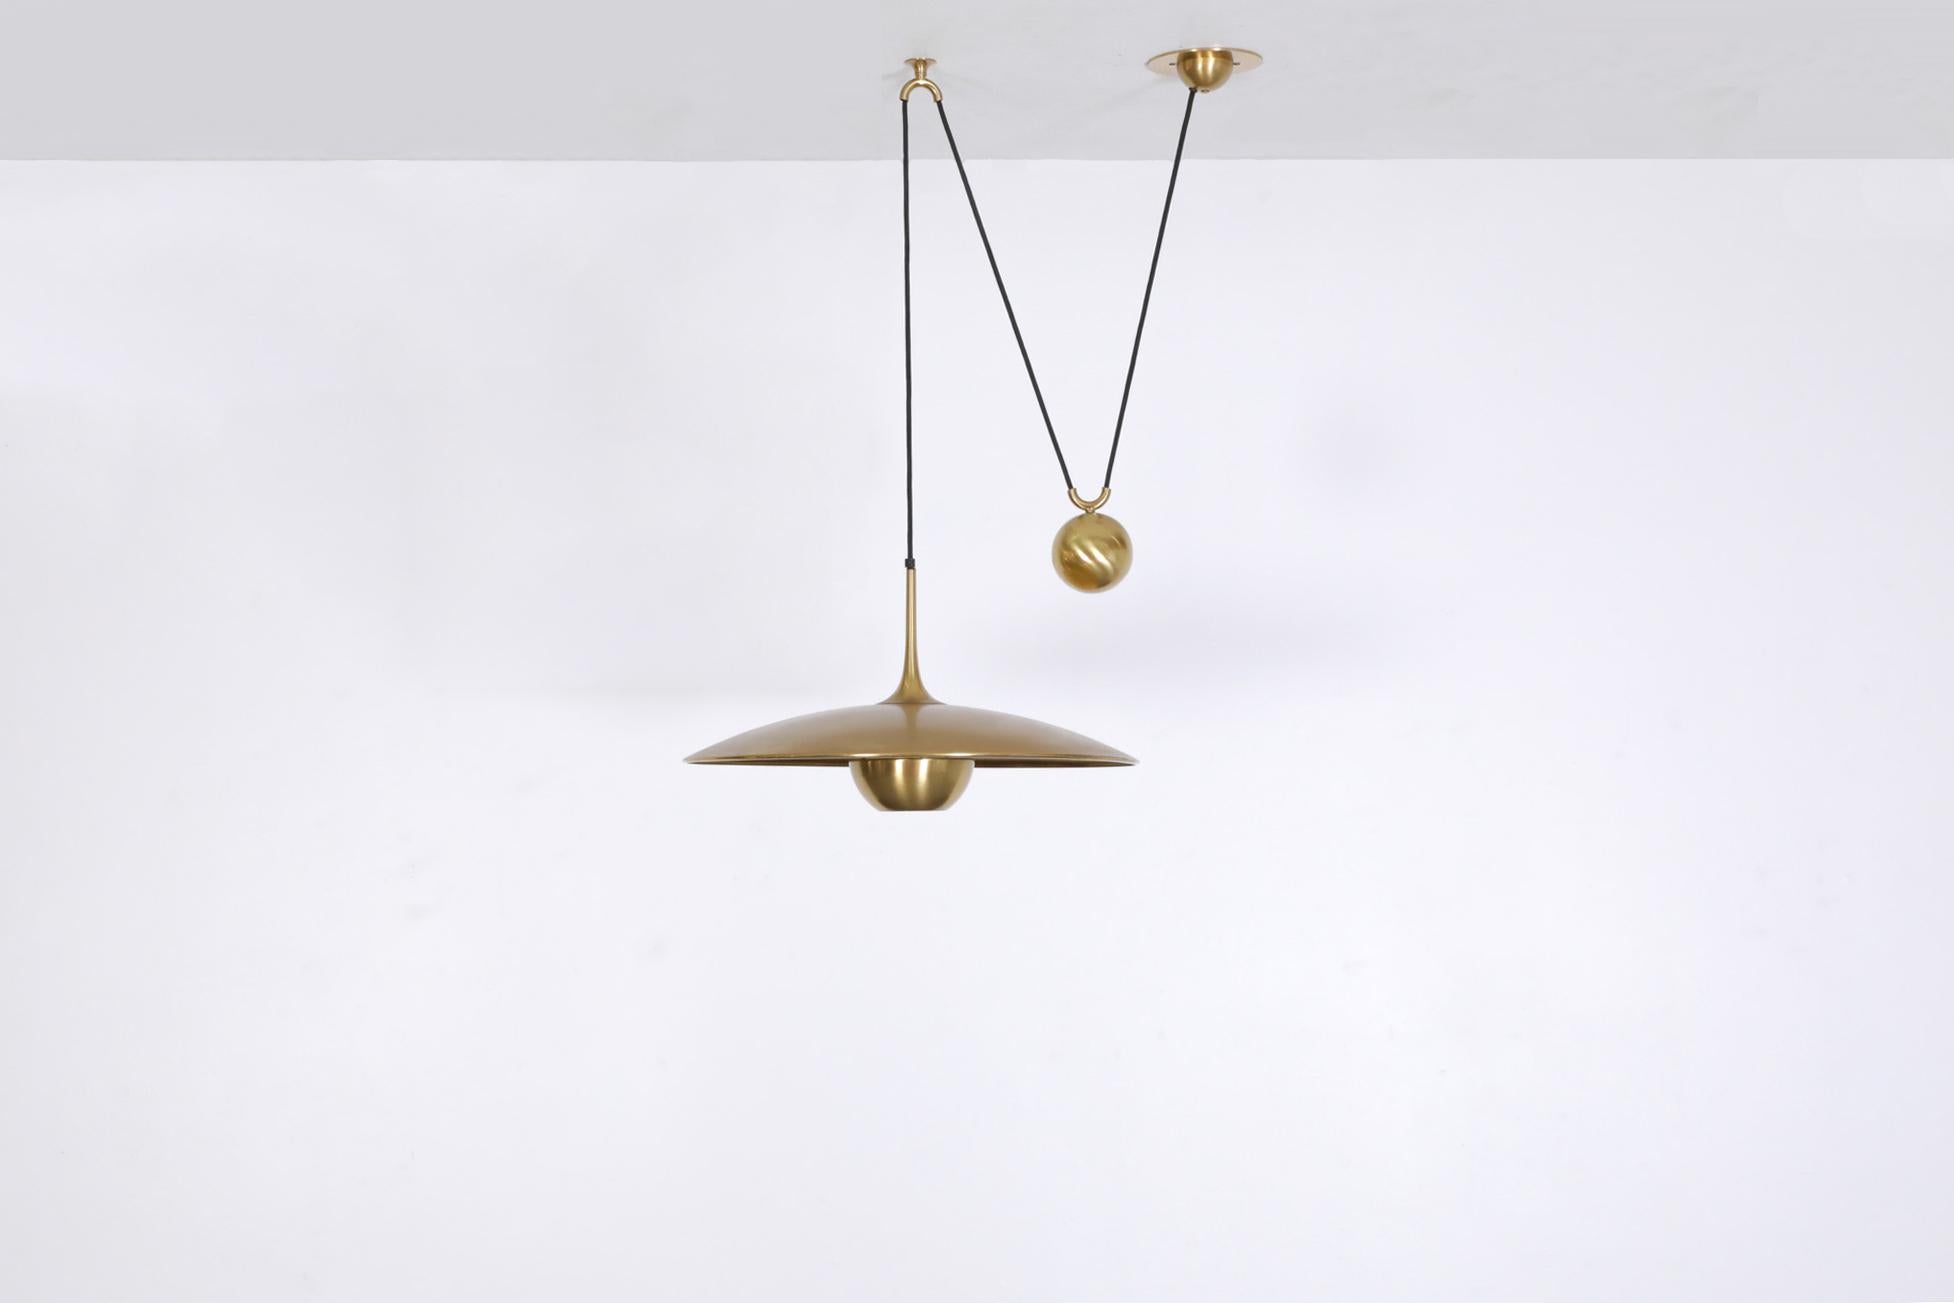 Beautifully designed 'Onos 55' brass ceiling pendant by Florian Schulz. Florian Schulz is a German lighting designer renowned for his minimalist and modern designs. He founded his eponymous lighting company in 1960 and has since become a prominent